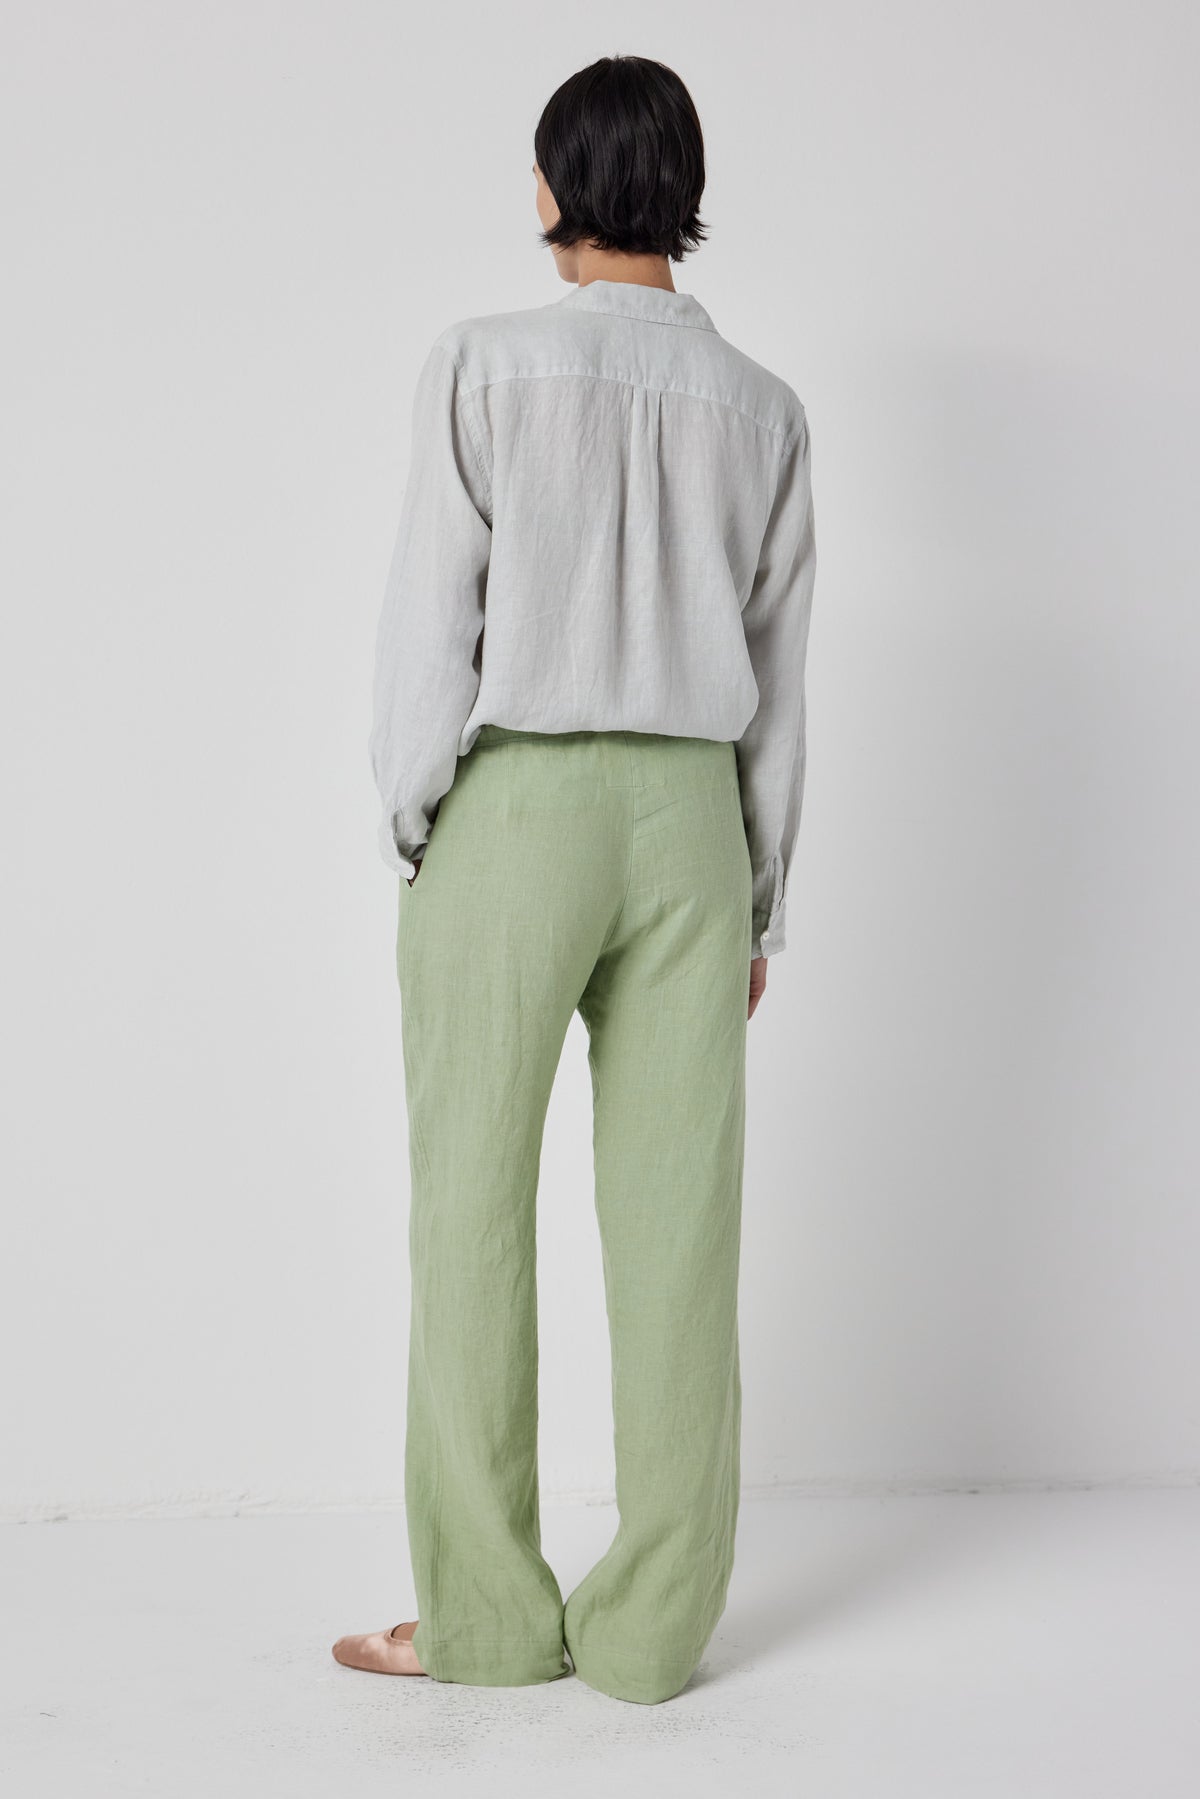 A person viewed from behind, wearing a loose gray blouse and Velvet by Jenny Graham's Pico Linen Pant in light green, standing against a plain white background.-36168858599617